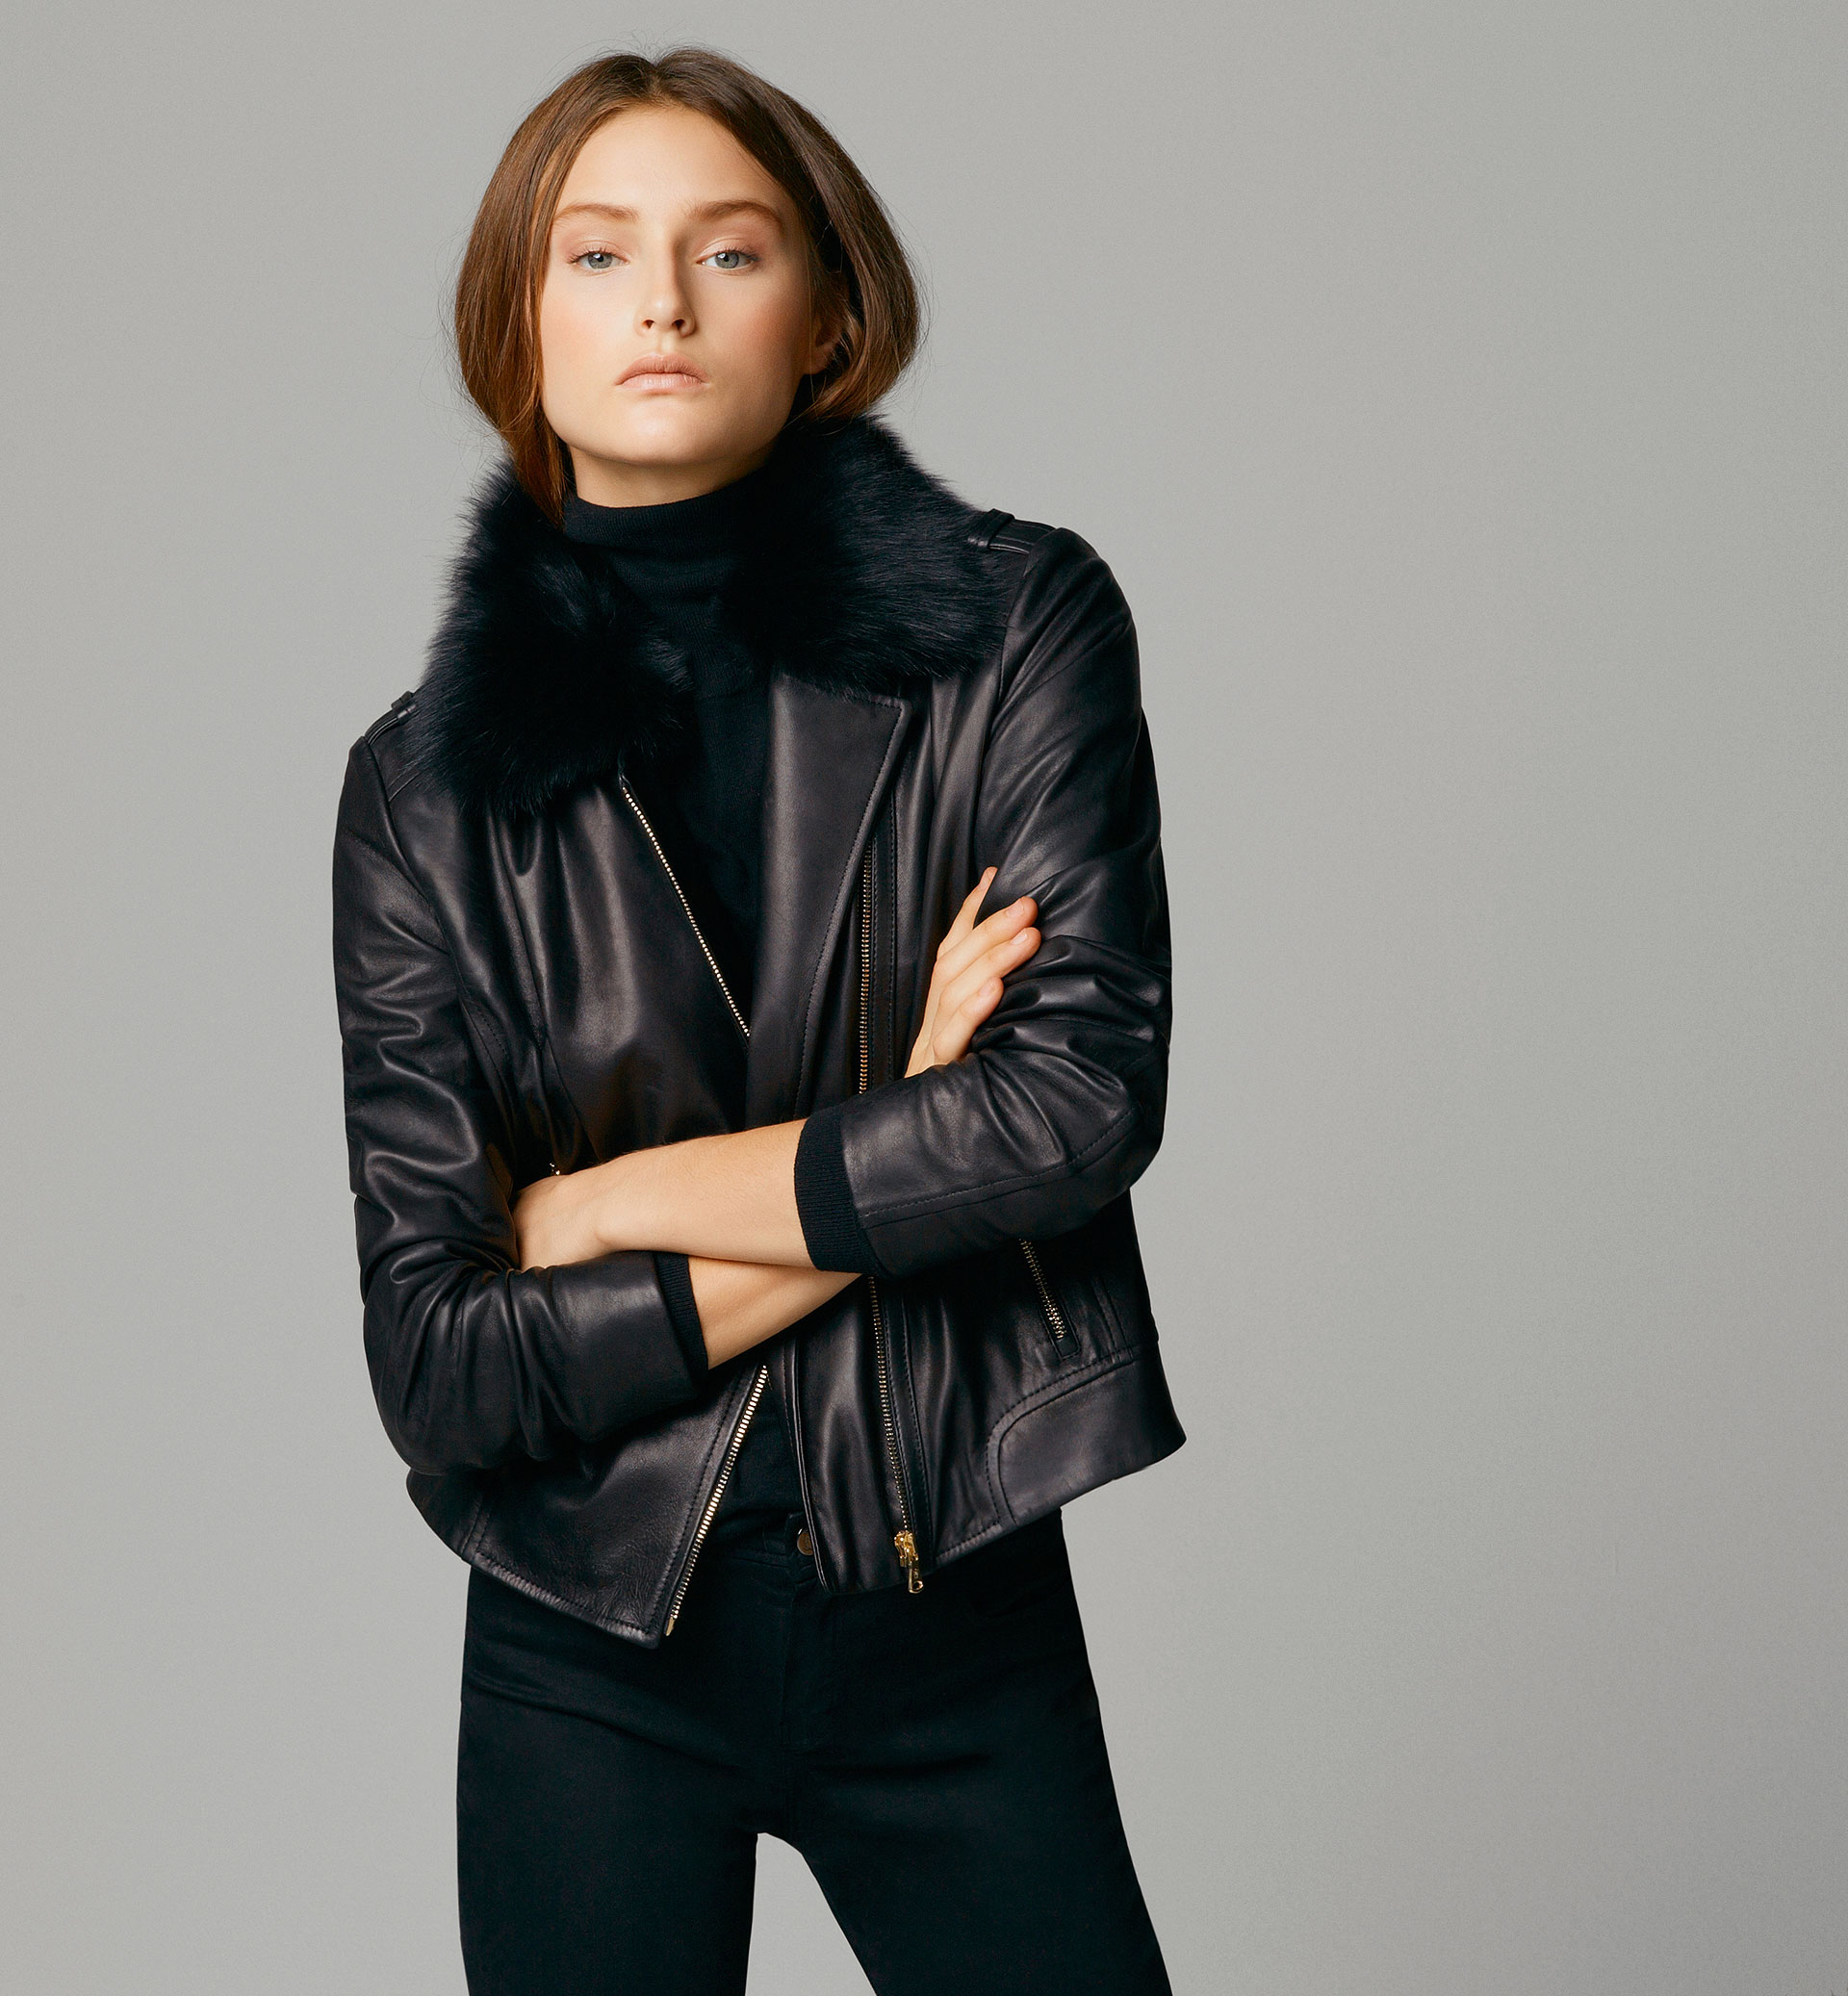 BLACK LEATHER JACKET WITH FUR-LINED COLLAR